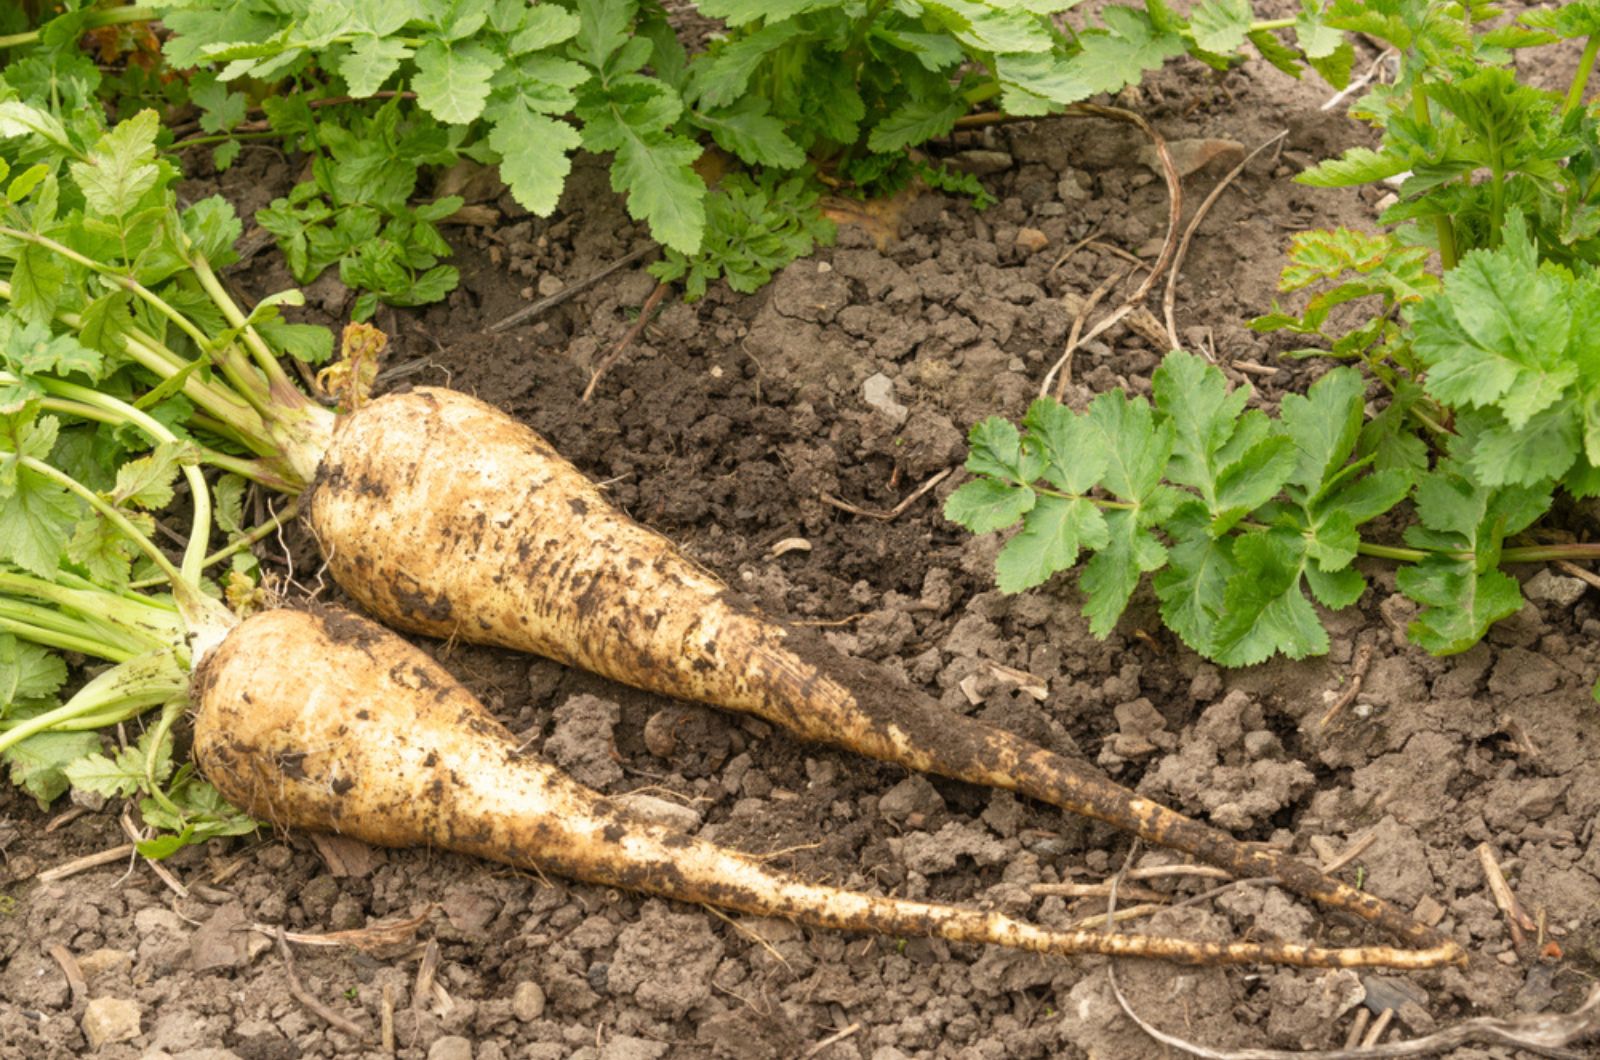 harvested Parsnips on the ground